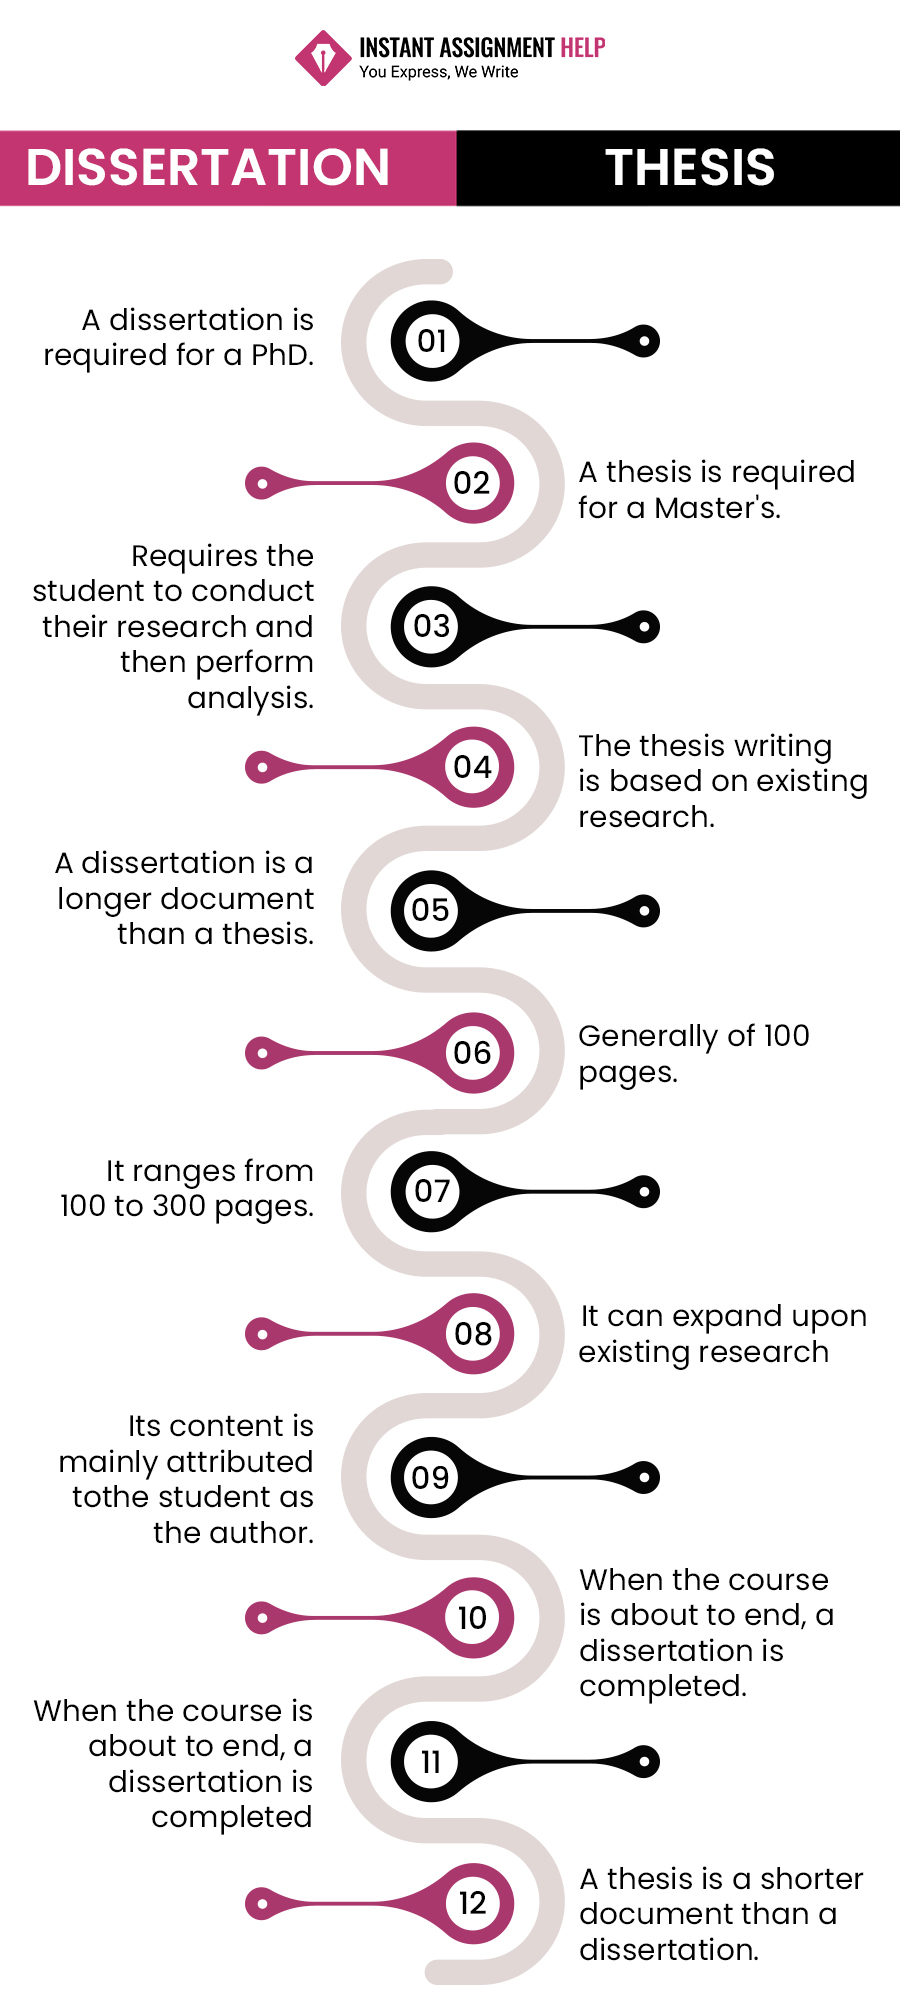 compare of thesis and dissertation